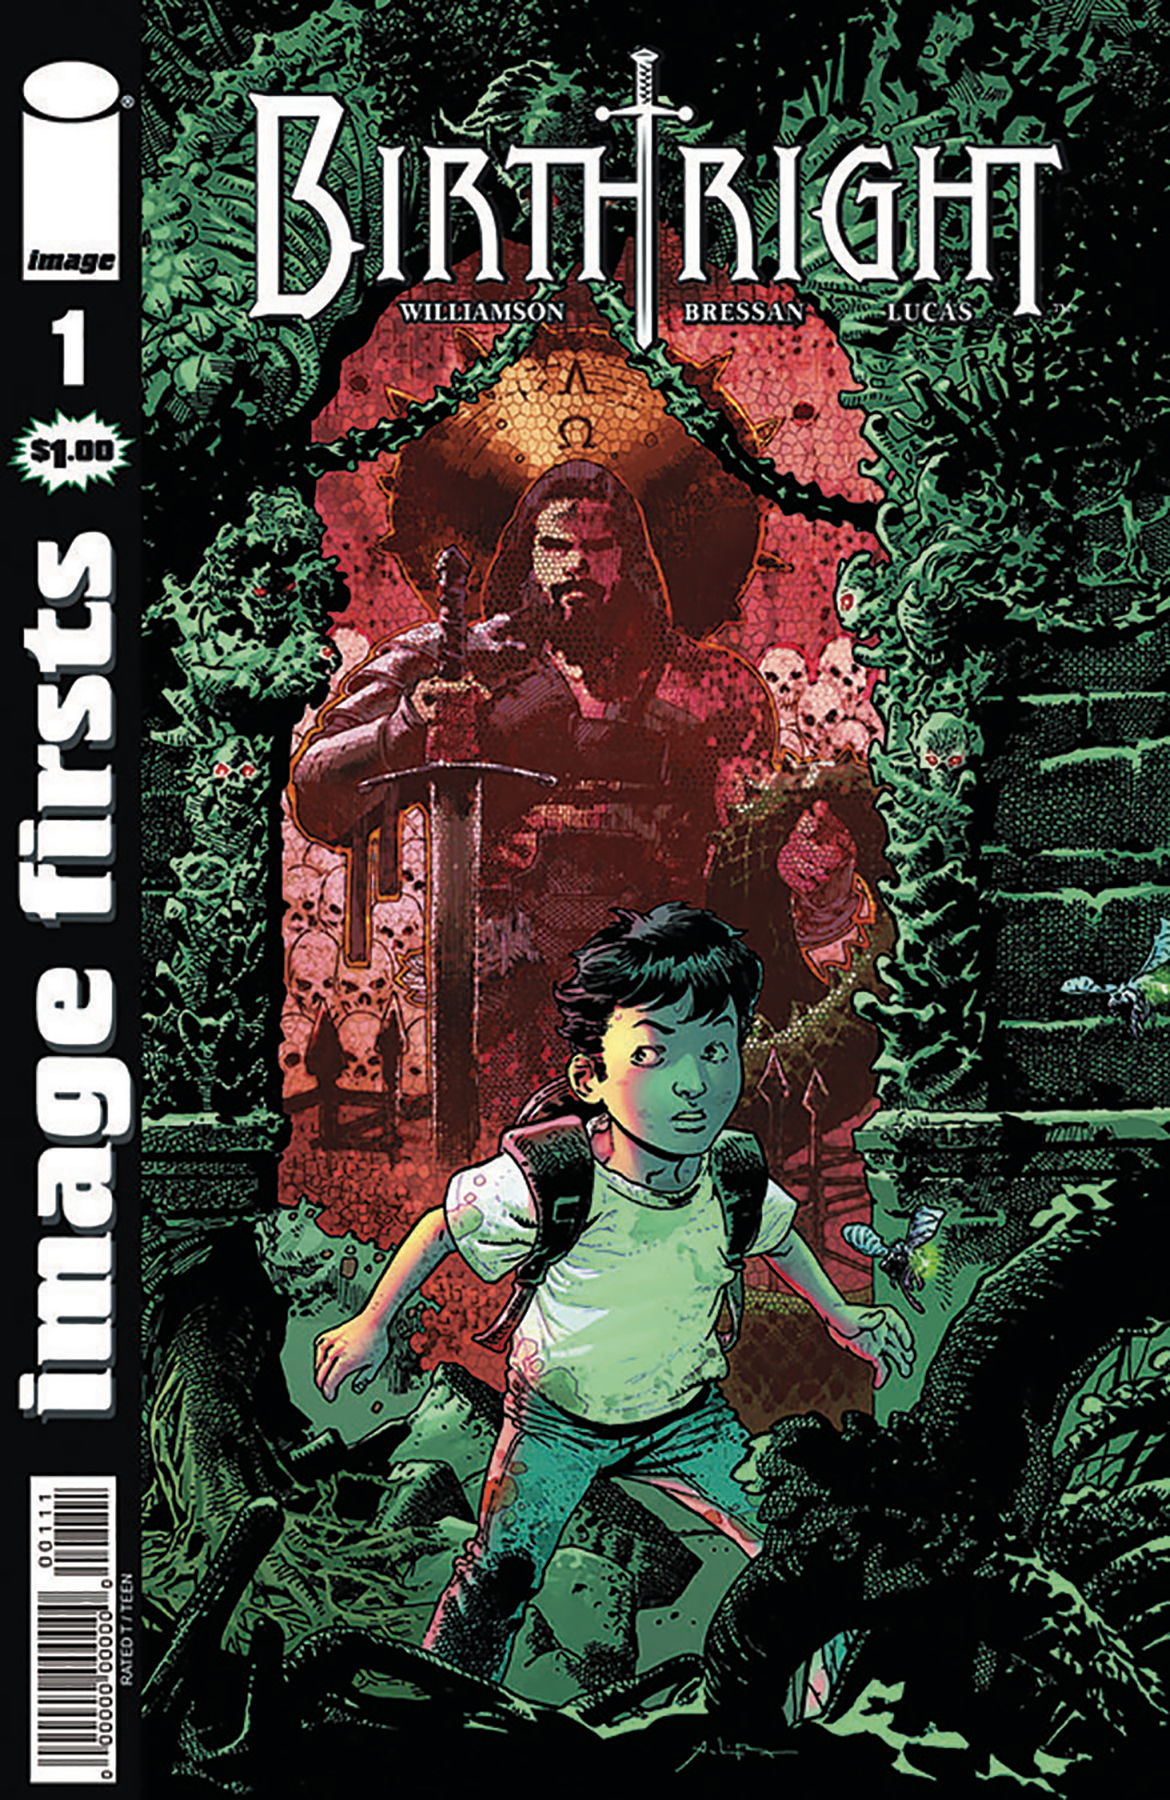 Image Firsts Birthright #1 Volume 64